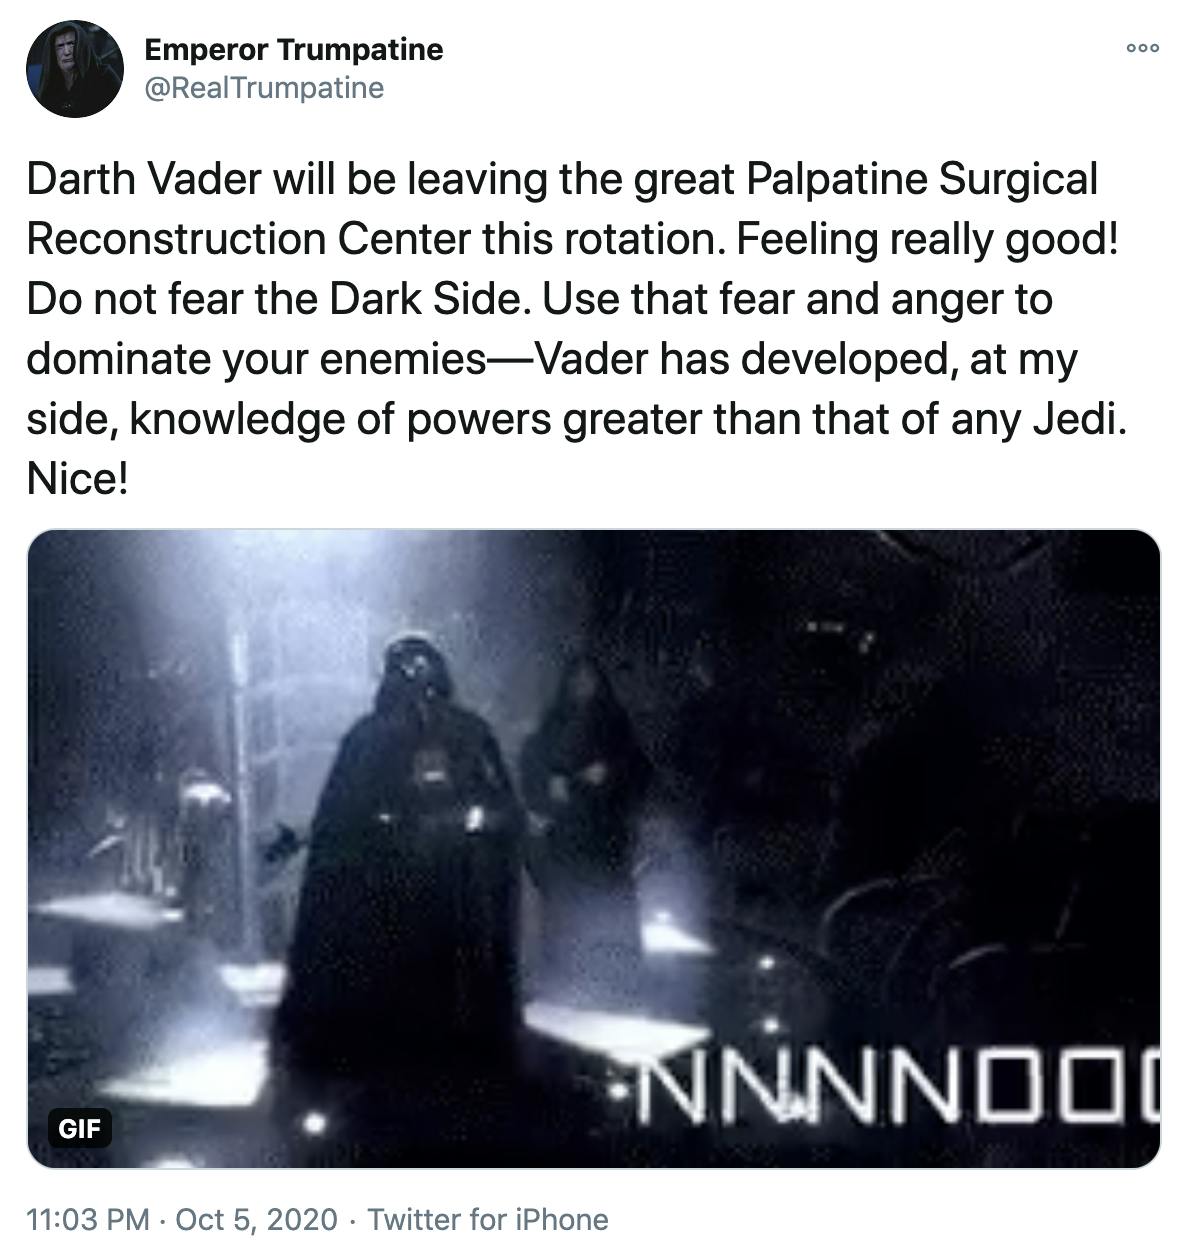 "Darth Vader will be leaving the great Palpatine Surgical Reconstruction Center this rotation. Feeling really good! Do not fear the Dark Side. Use that fear and anger to dominate your enemies—Vader has developed, at my side, knowledge of powers greater than that of any Jedi. Nice!" gif of Darth Vader as he screams noooooo